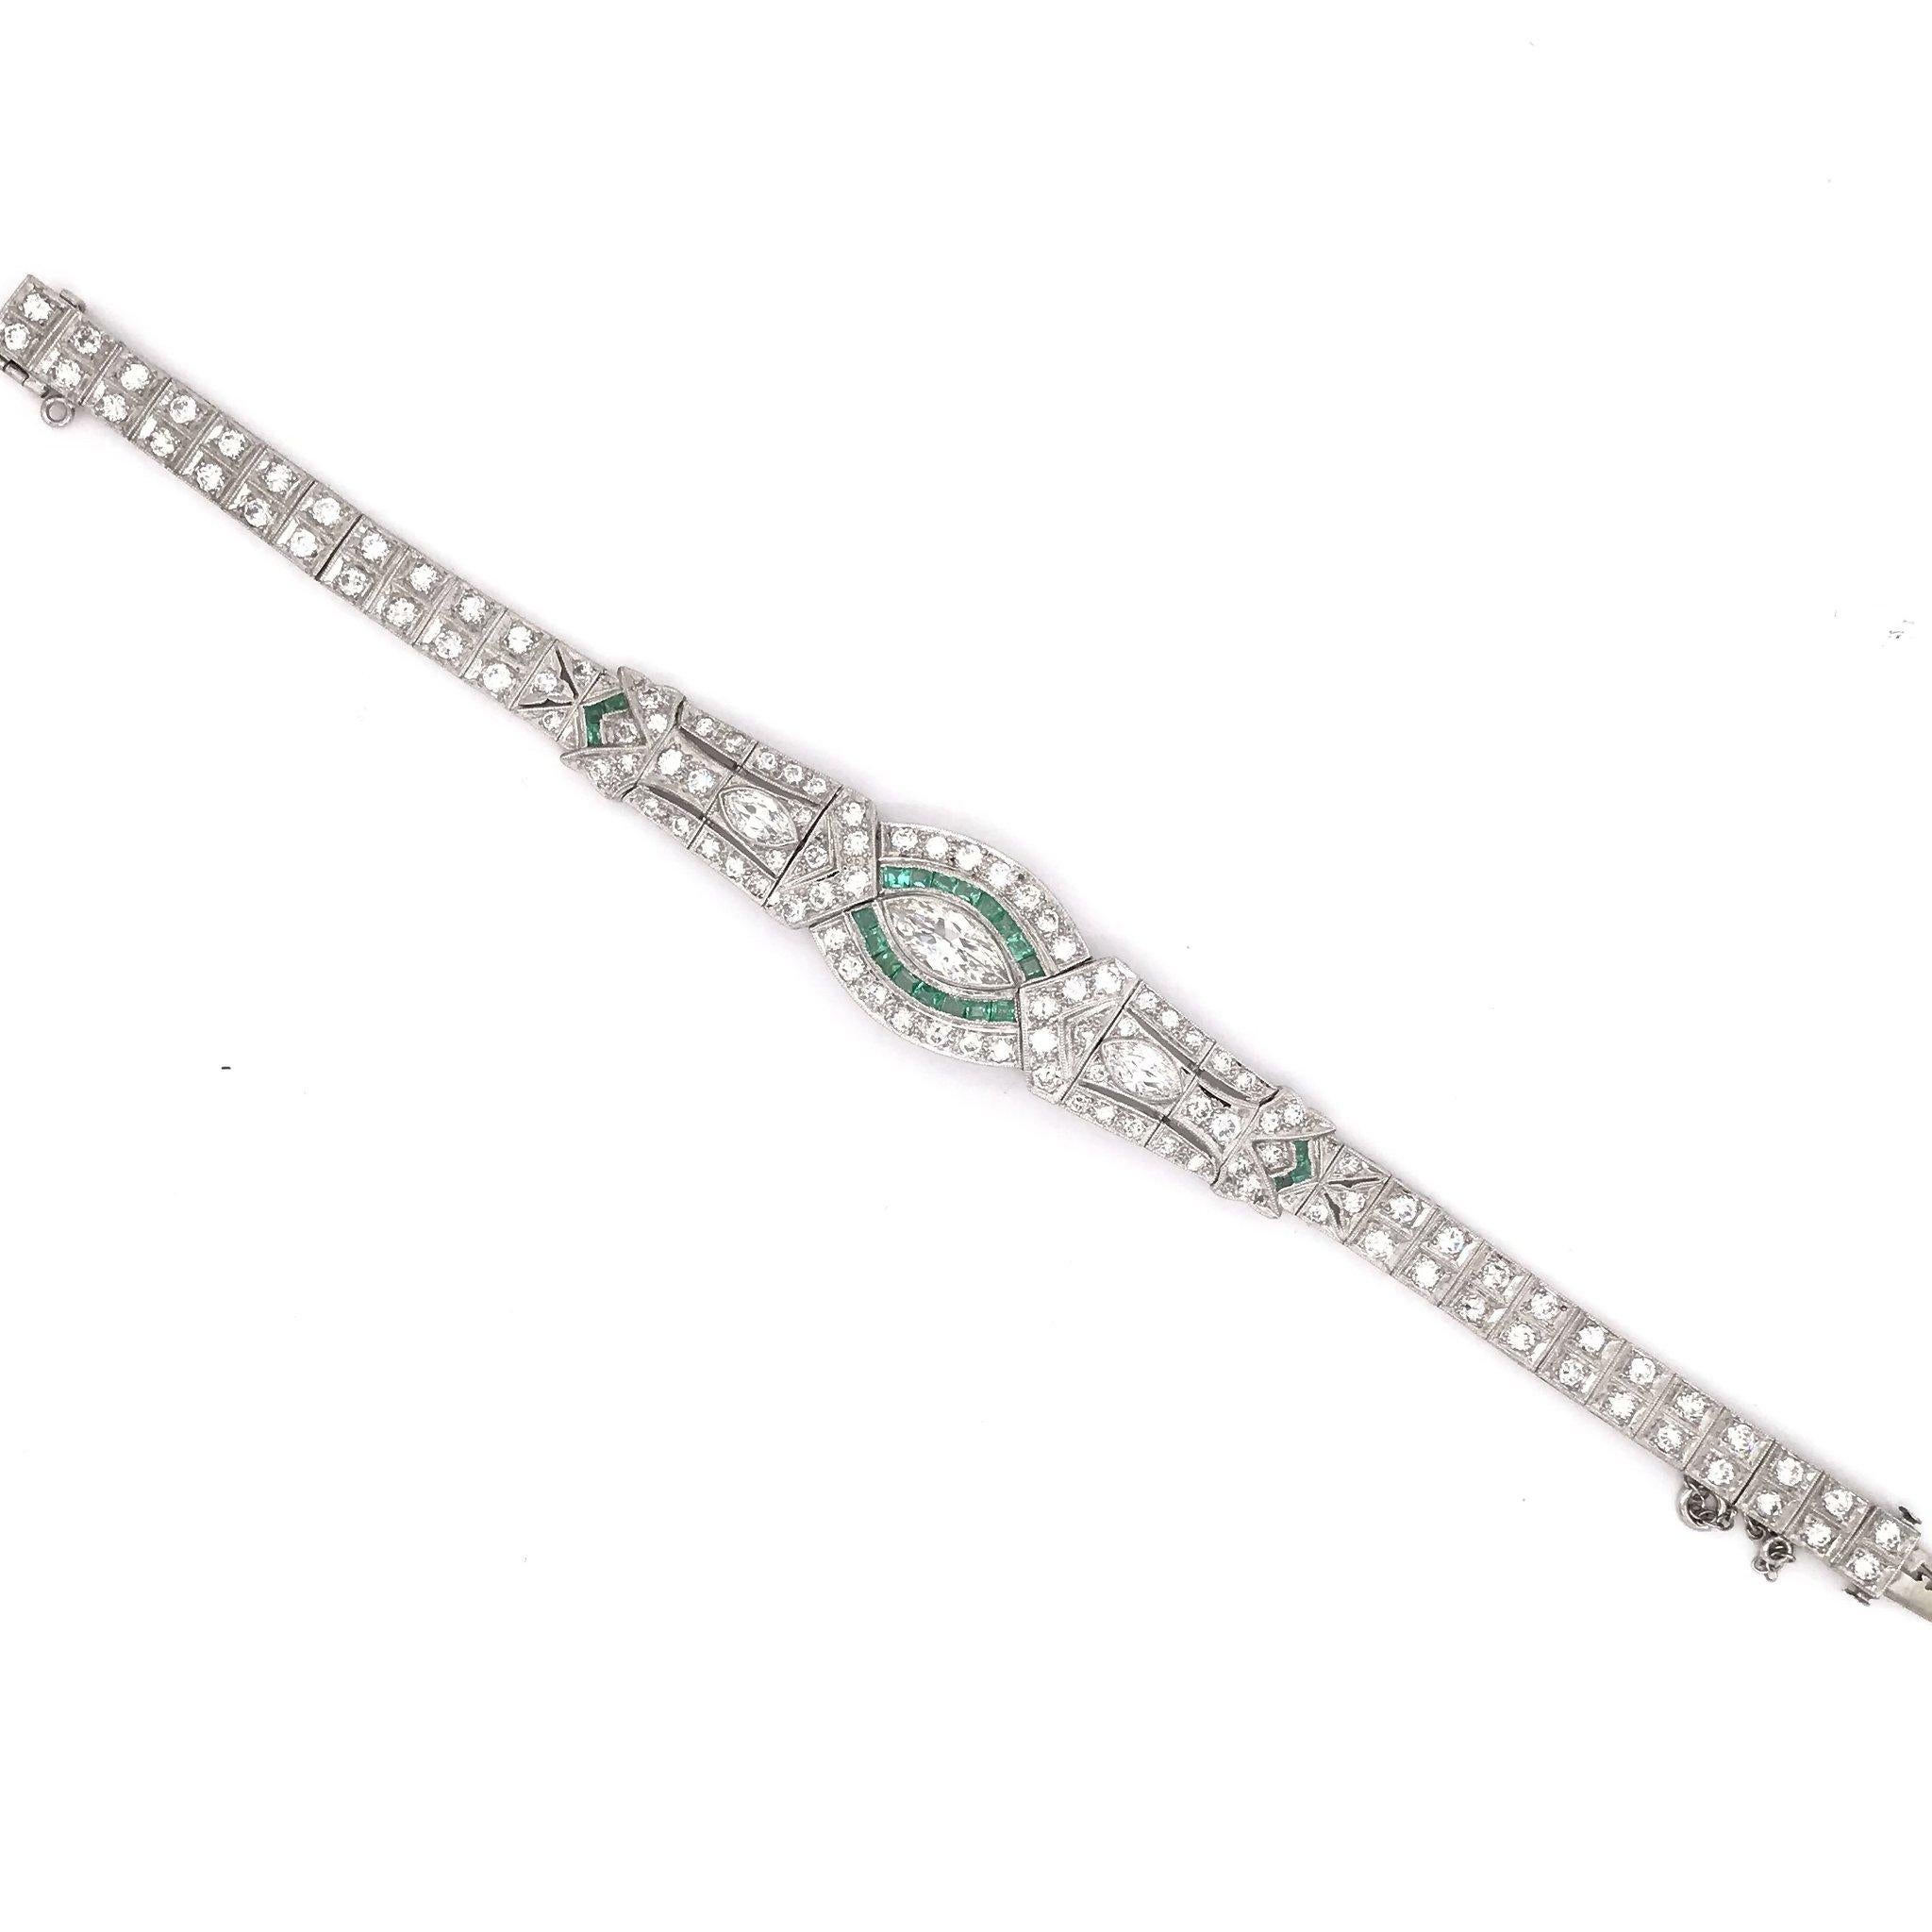 An absolutely stunning antique piece, this platinum bracelet was skillfully handcrafted sometime during the Art Deco design period ( 1920-1940 ). The bracelet setting is platinum and features an impressive 139 gemstones in total. The center diamond